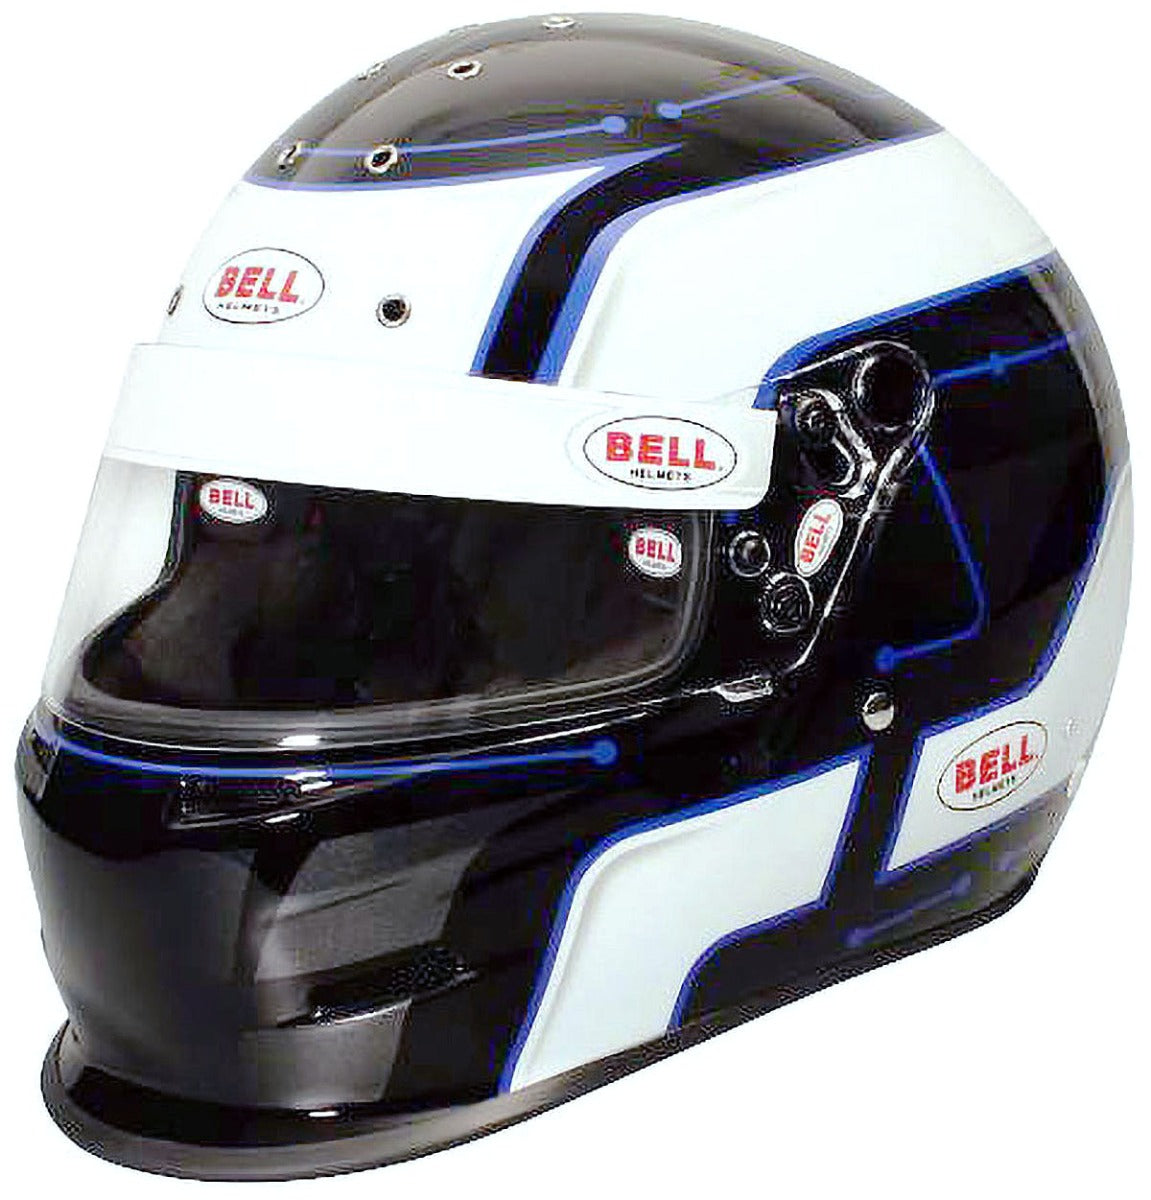 Bell K1 Pro Helmet SA2020 Blue Front View Image